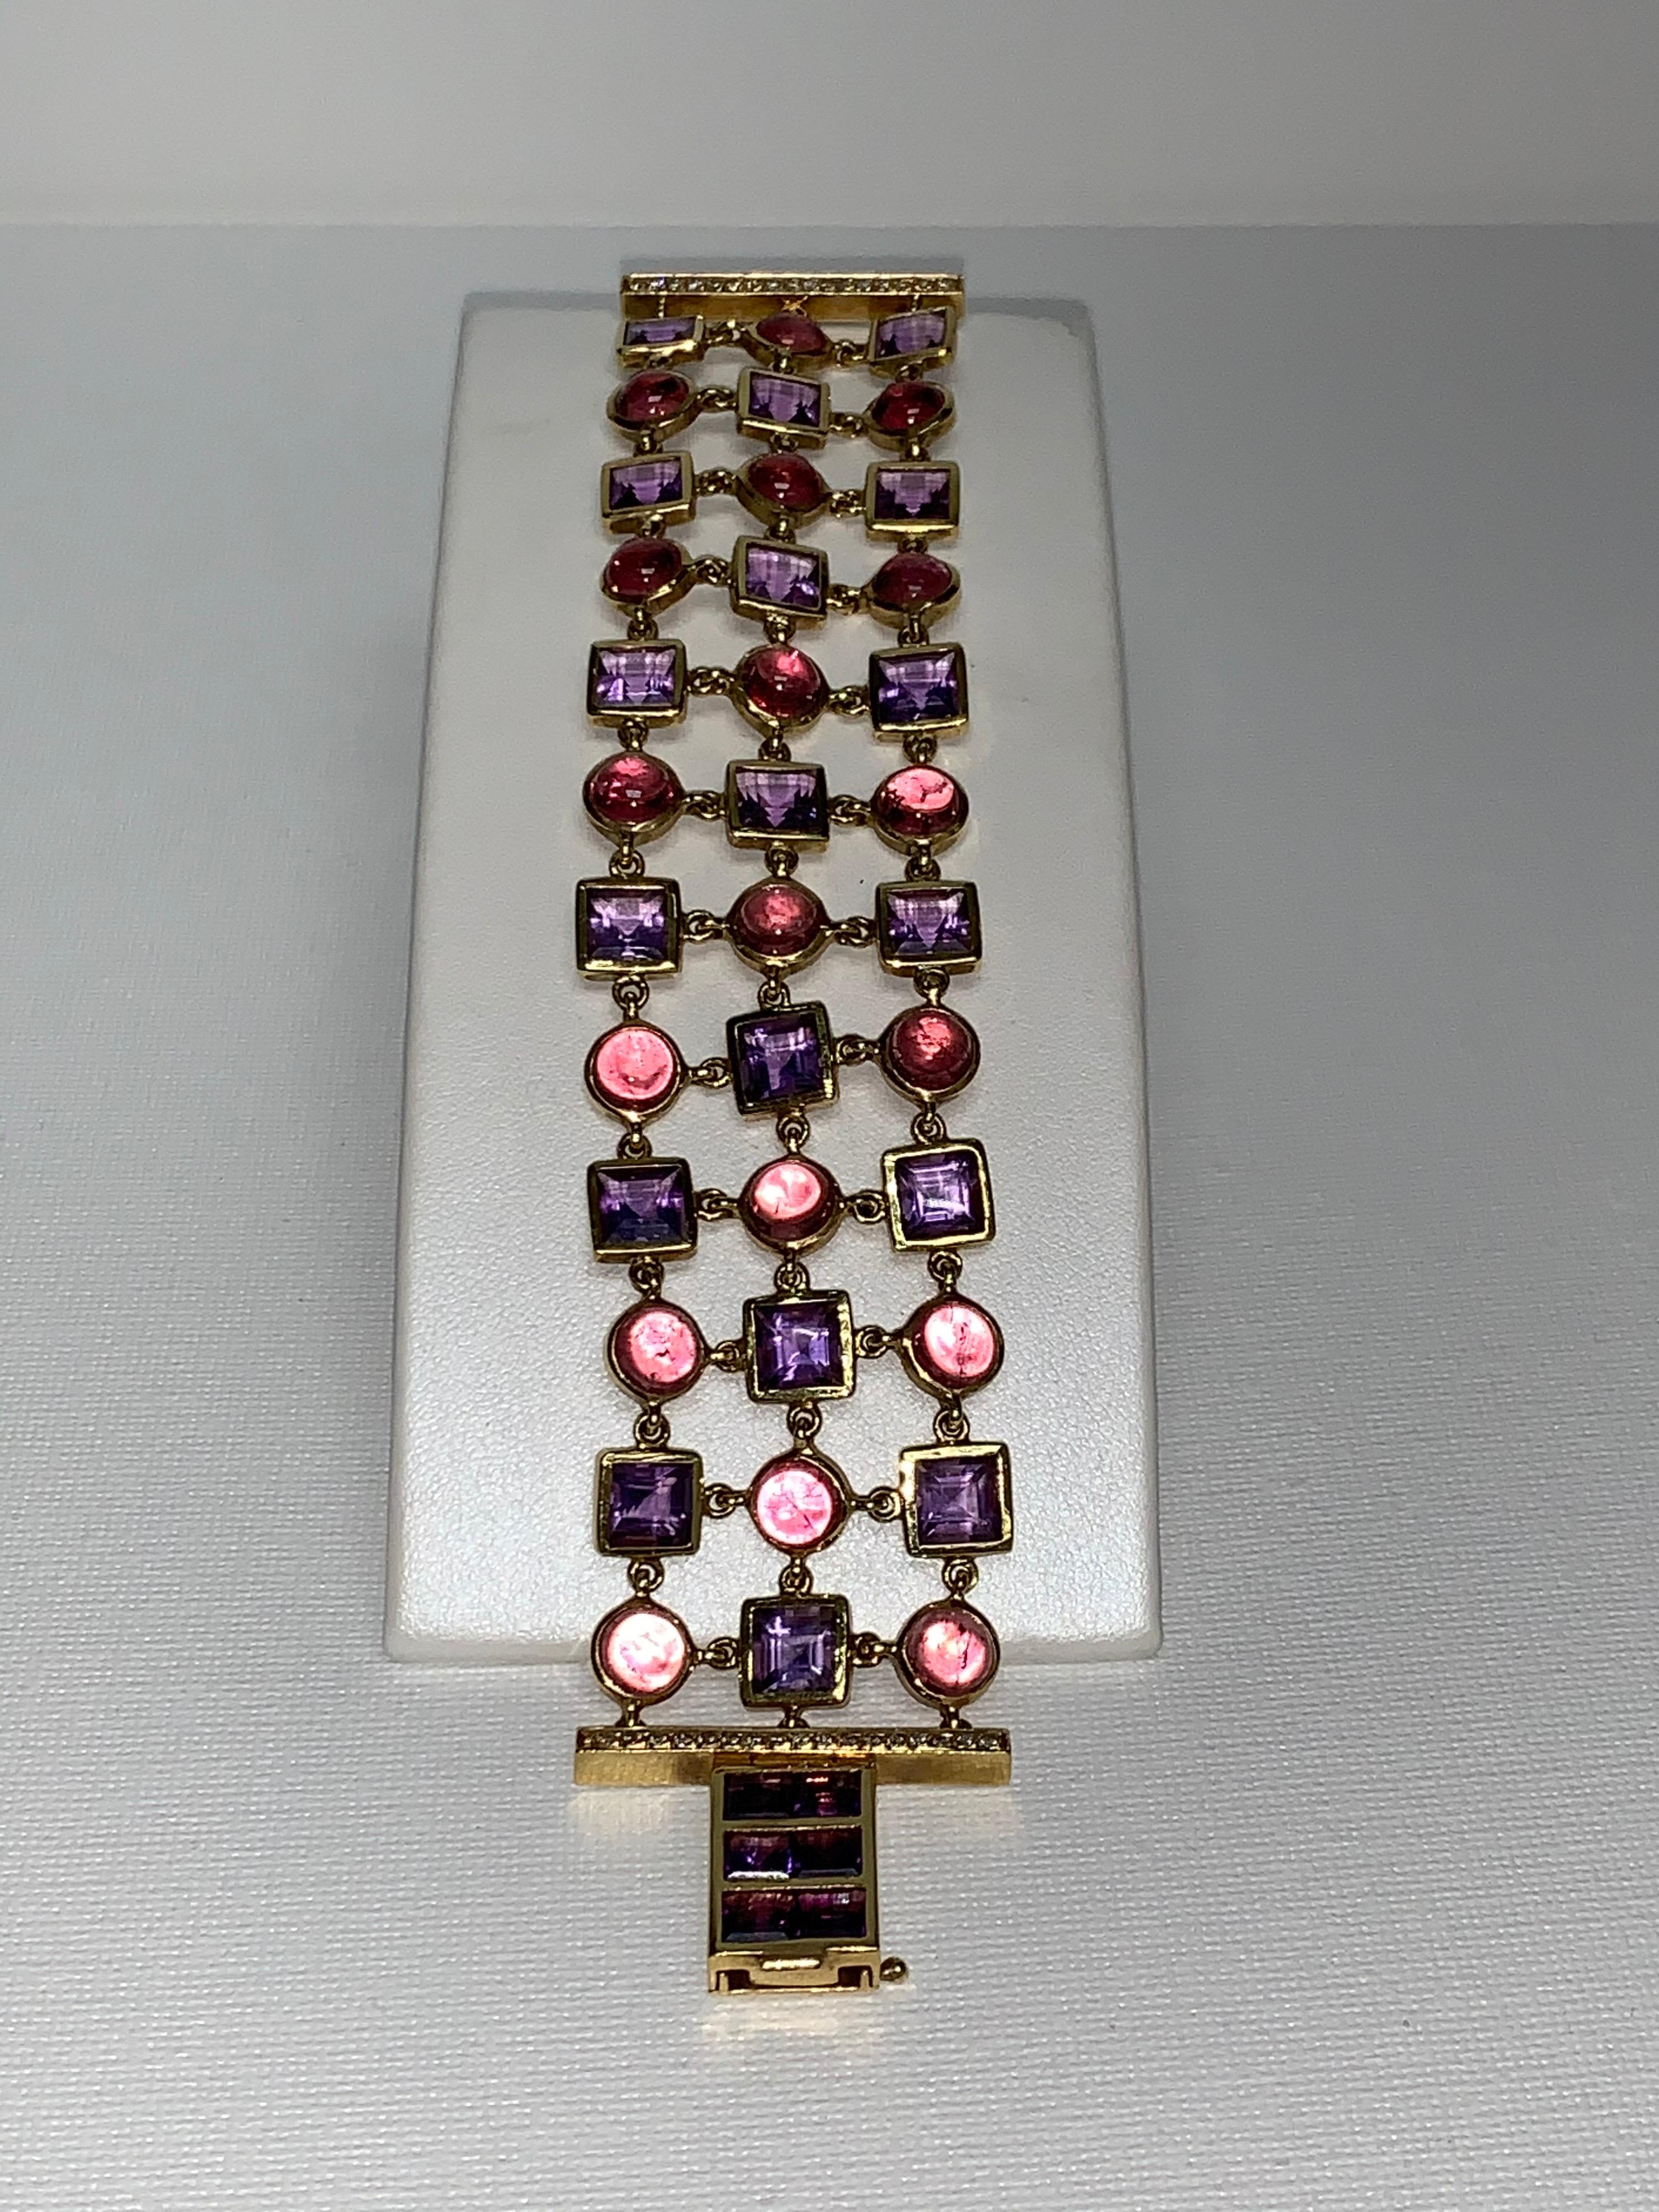 Amethyst & Pink Tourmaline, Pavé Diamond Bracelet, Art Deco. 

Featuring an exquisite Amethyst & Pink Tourmaline Bracelet with 56.98 carats; accented White Pavé Diamonds with a total weight of 0.63 carats, set in 18K Yellow Gold. 

This